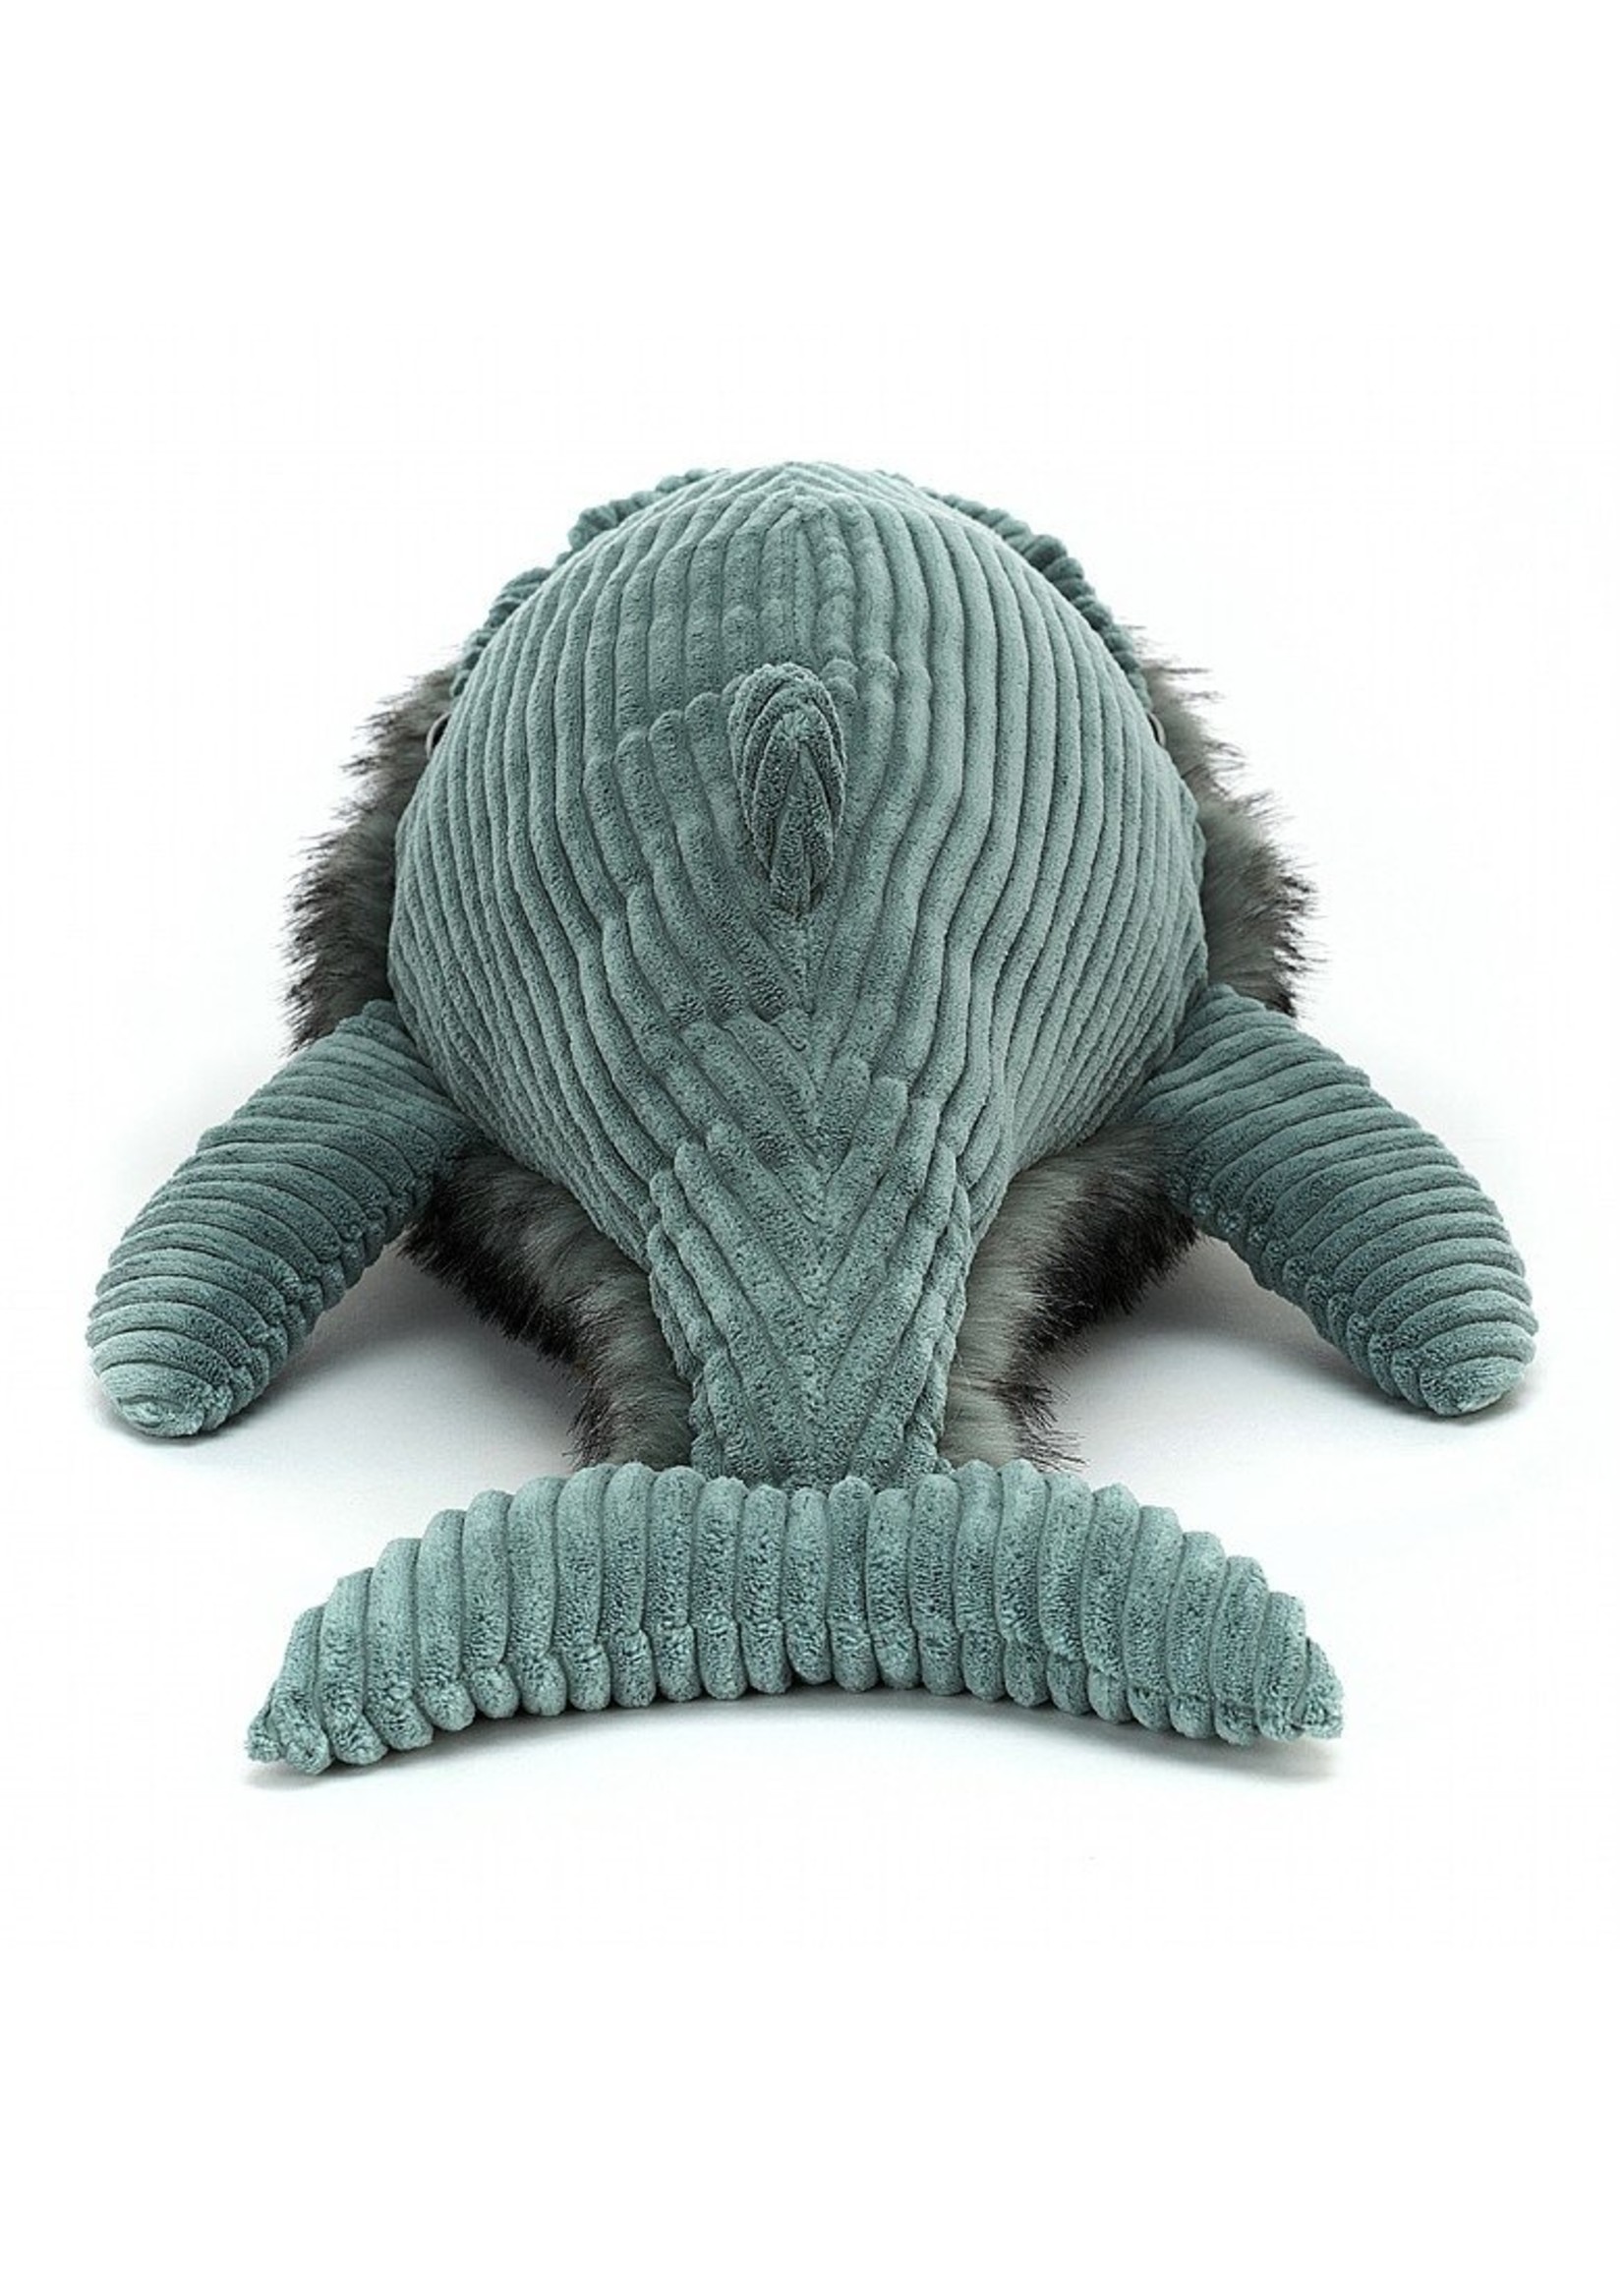 Jellycat Wiley Whale - Huge